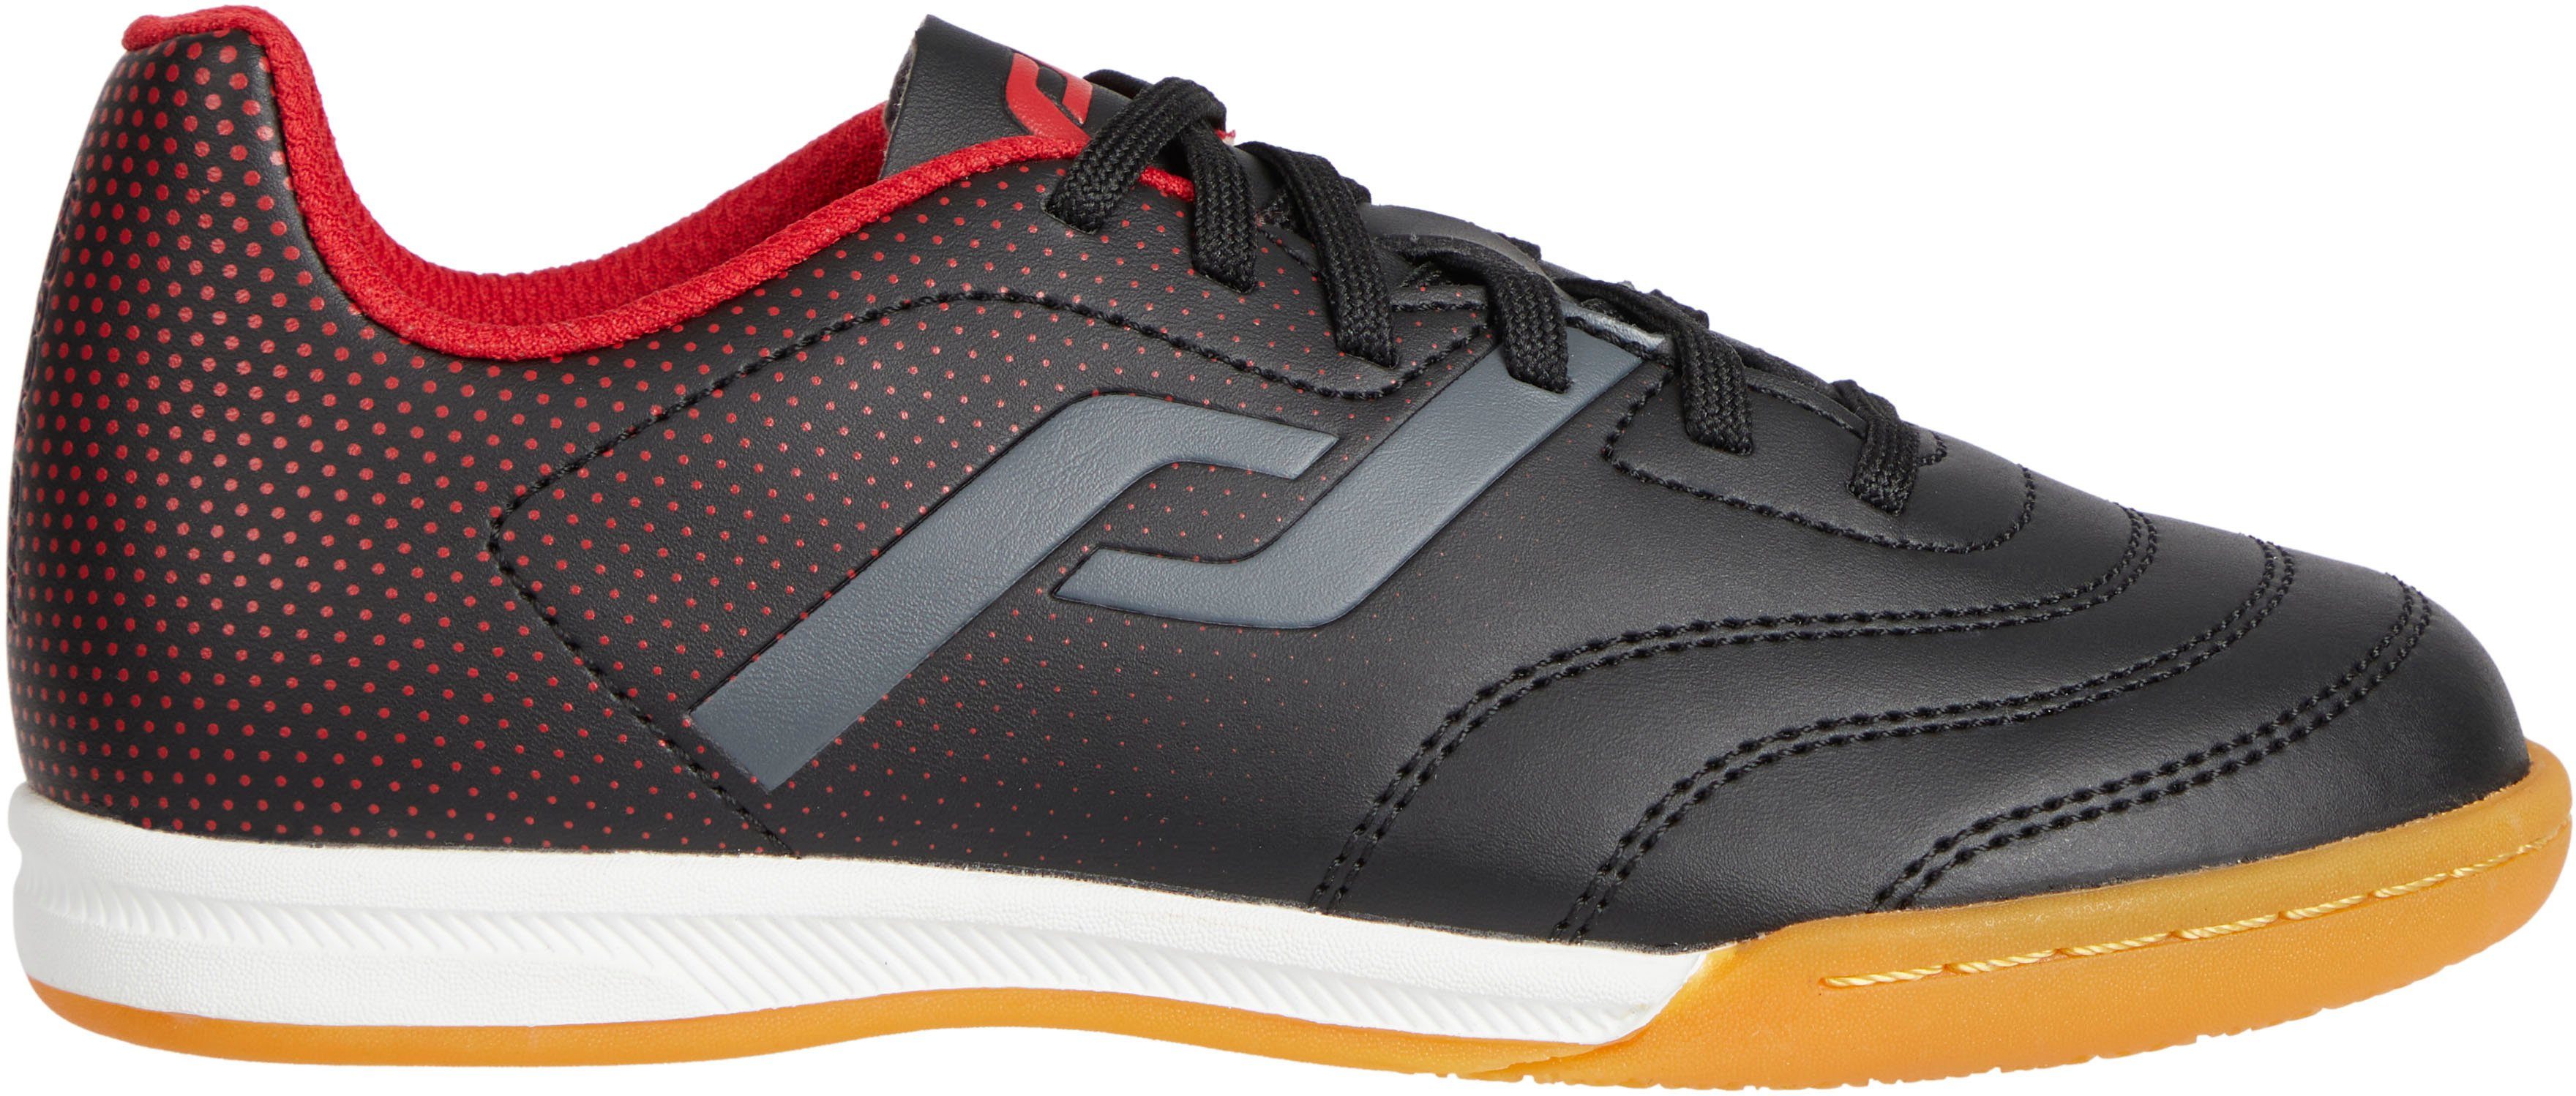 Pro Touch Ind Classic III IN JR Fußballschuh 901 BLACK/RED/ANTHRACITE